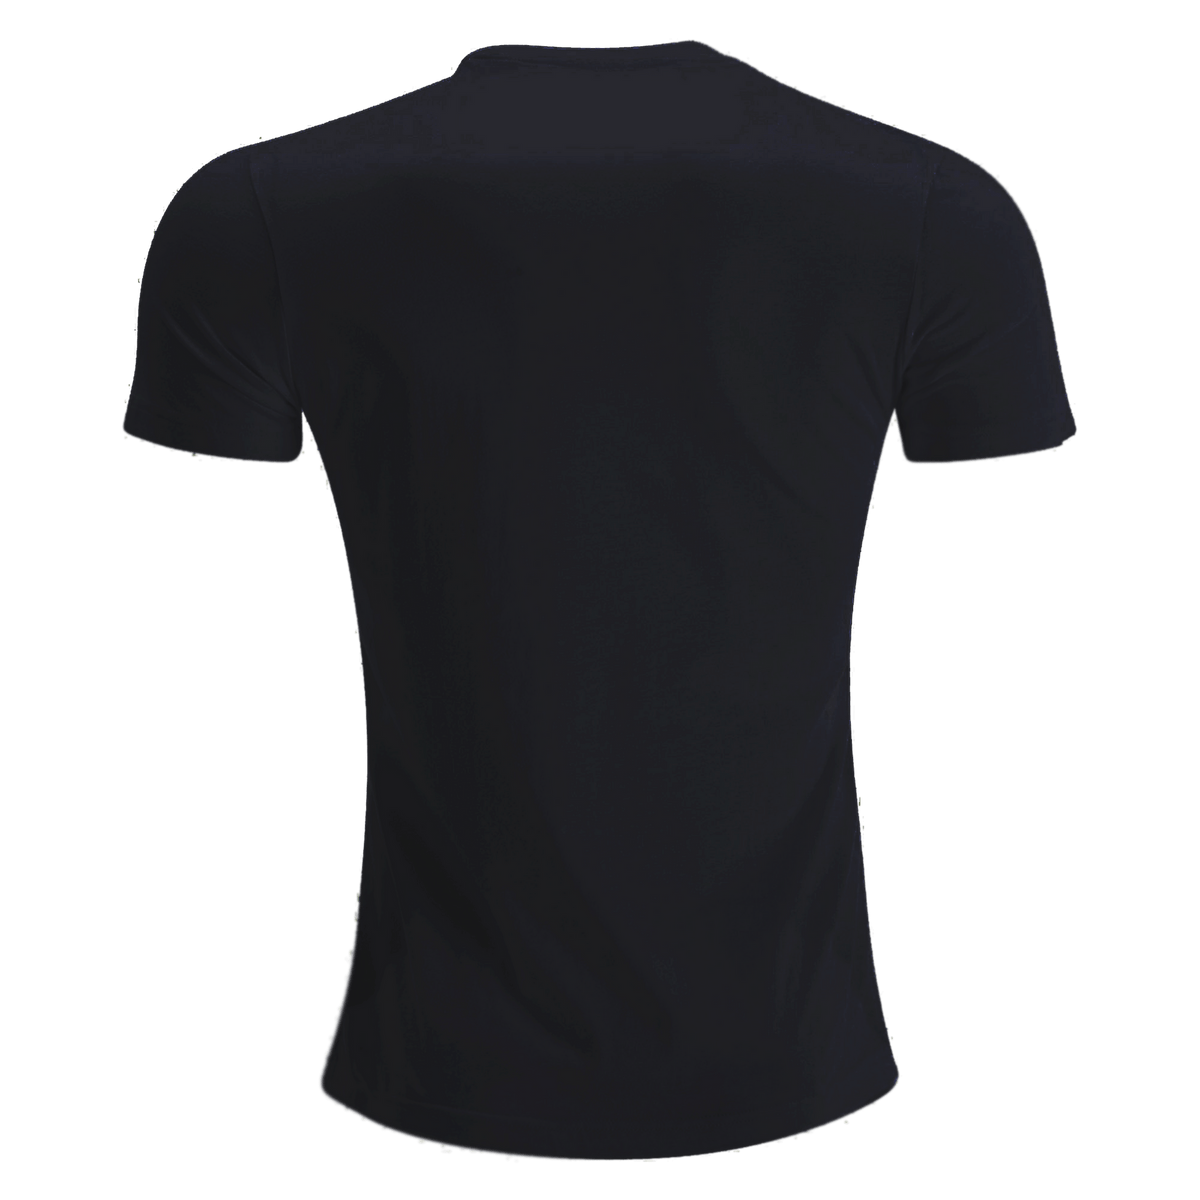 All Blacks Rugby T-Shirt by adidas | New Zealand Lifestyle Cotton Rugby ...